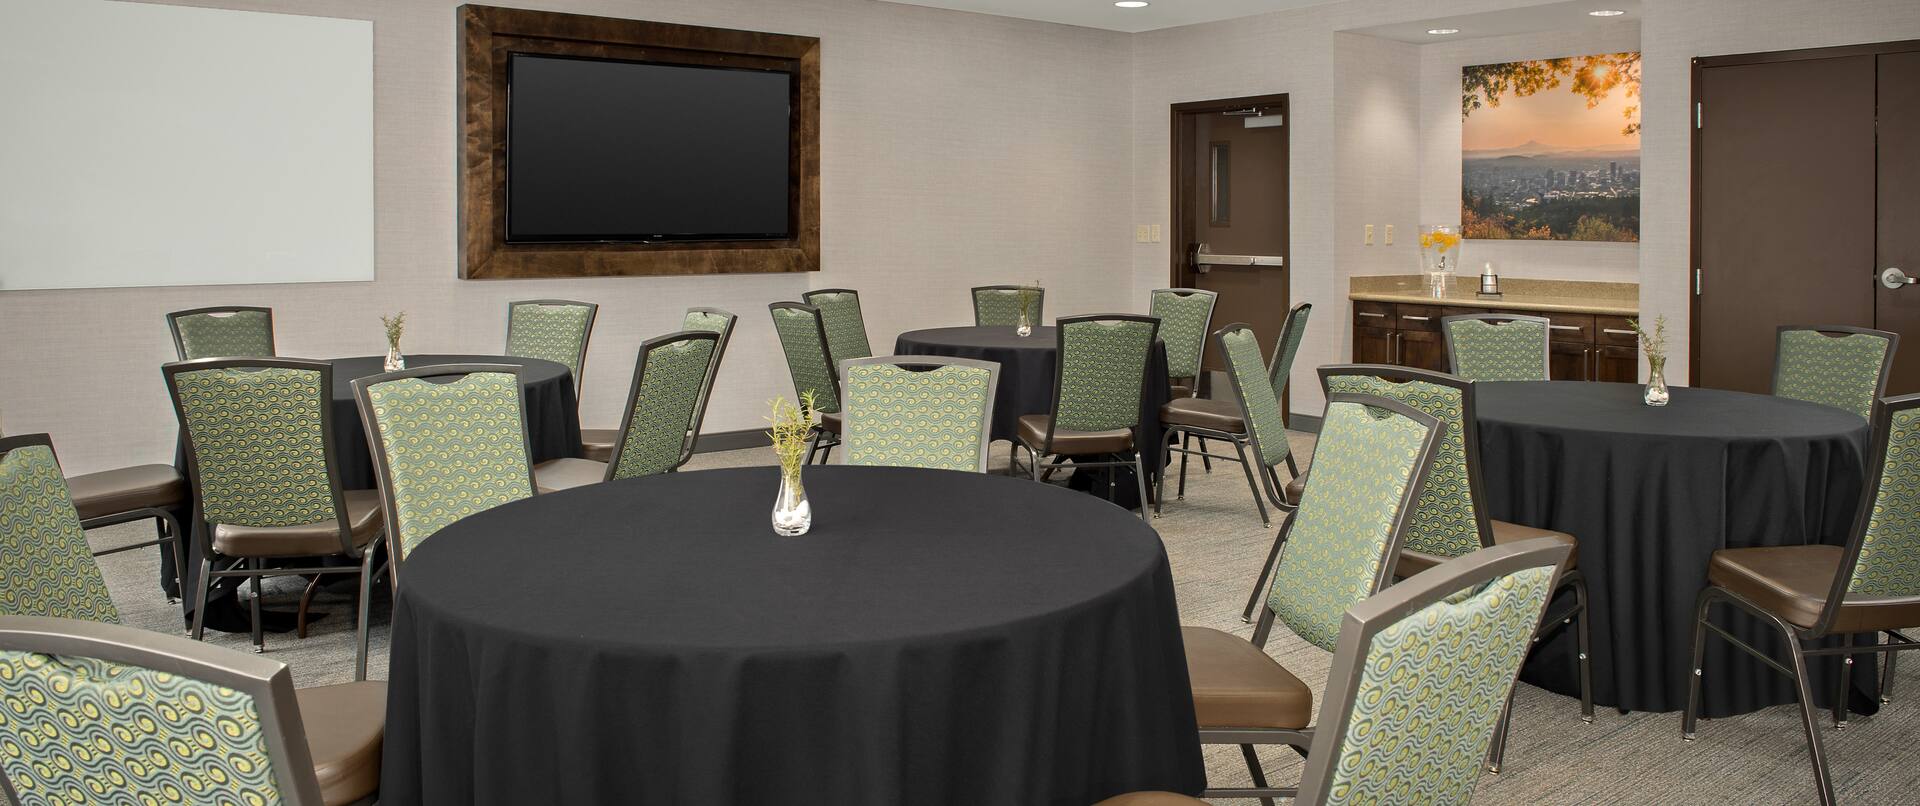 meeting room, banquet style